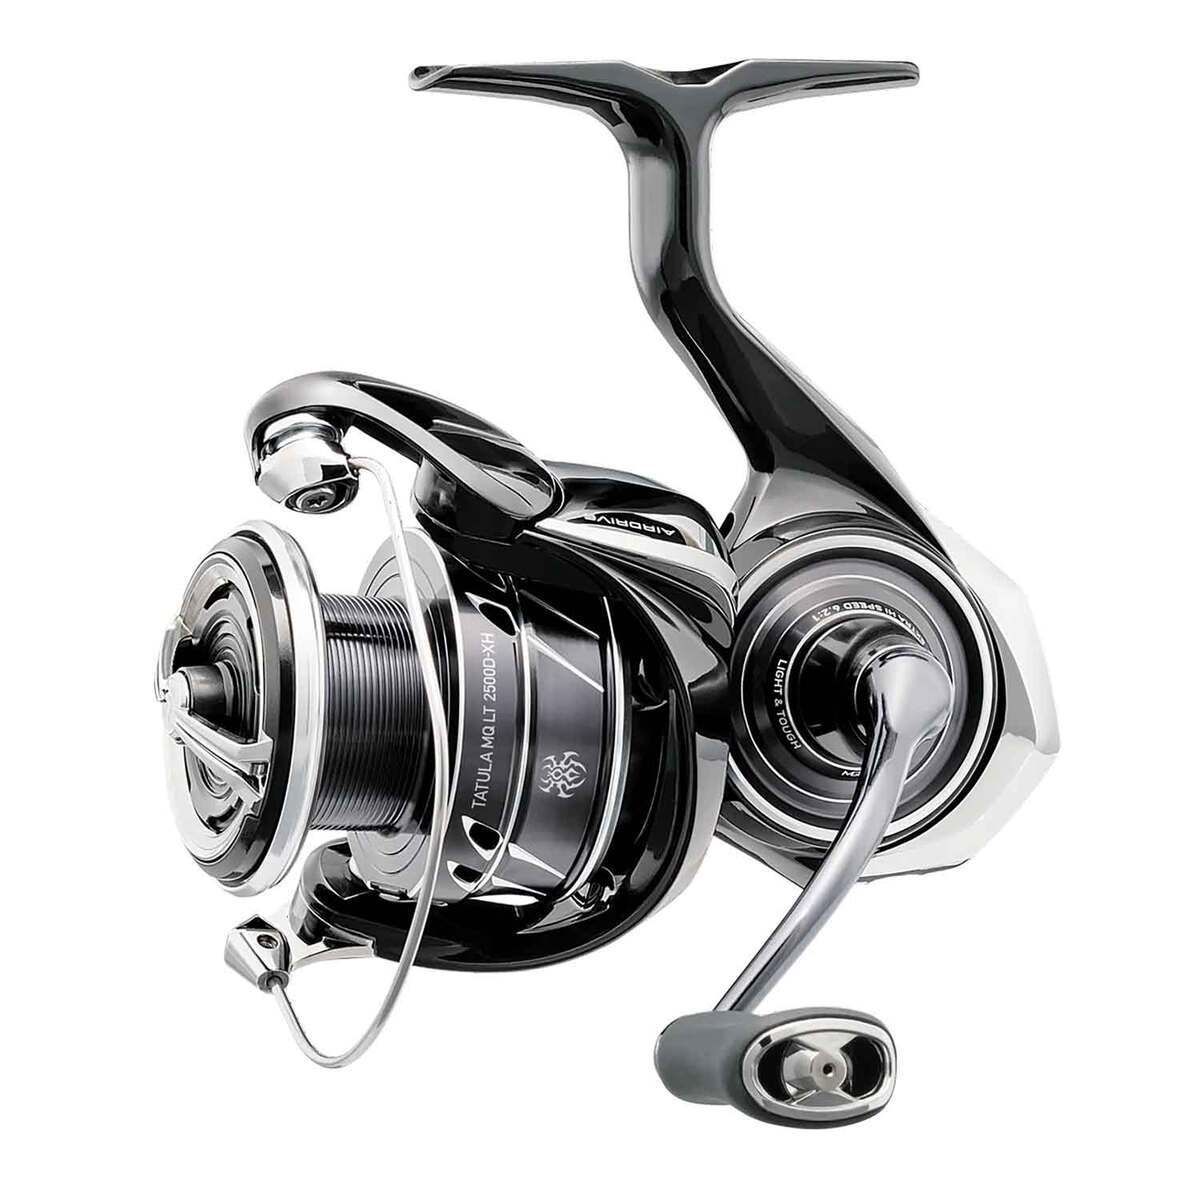 DAIWA 7' D-Wave Black and White Spinning Combo